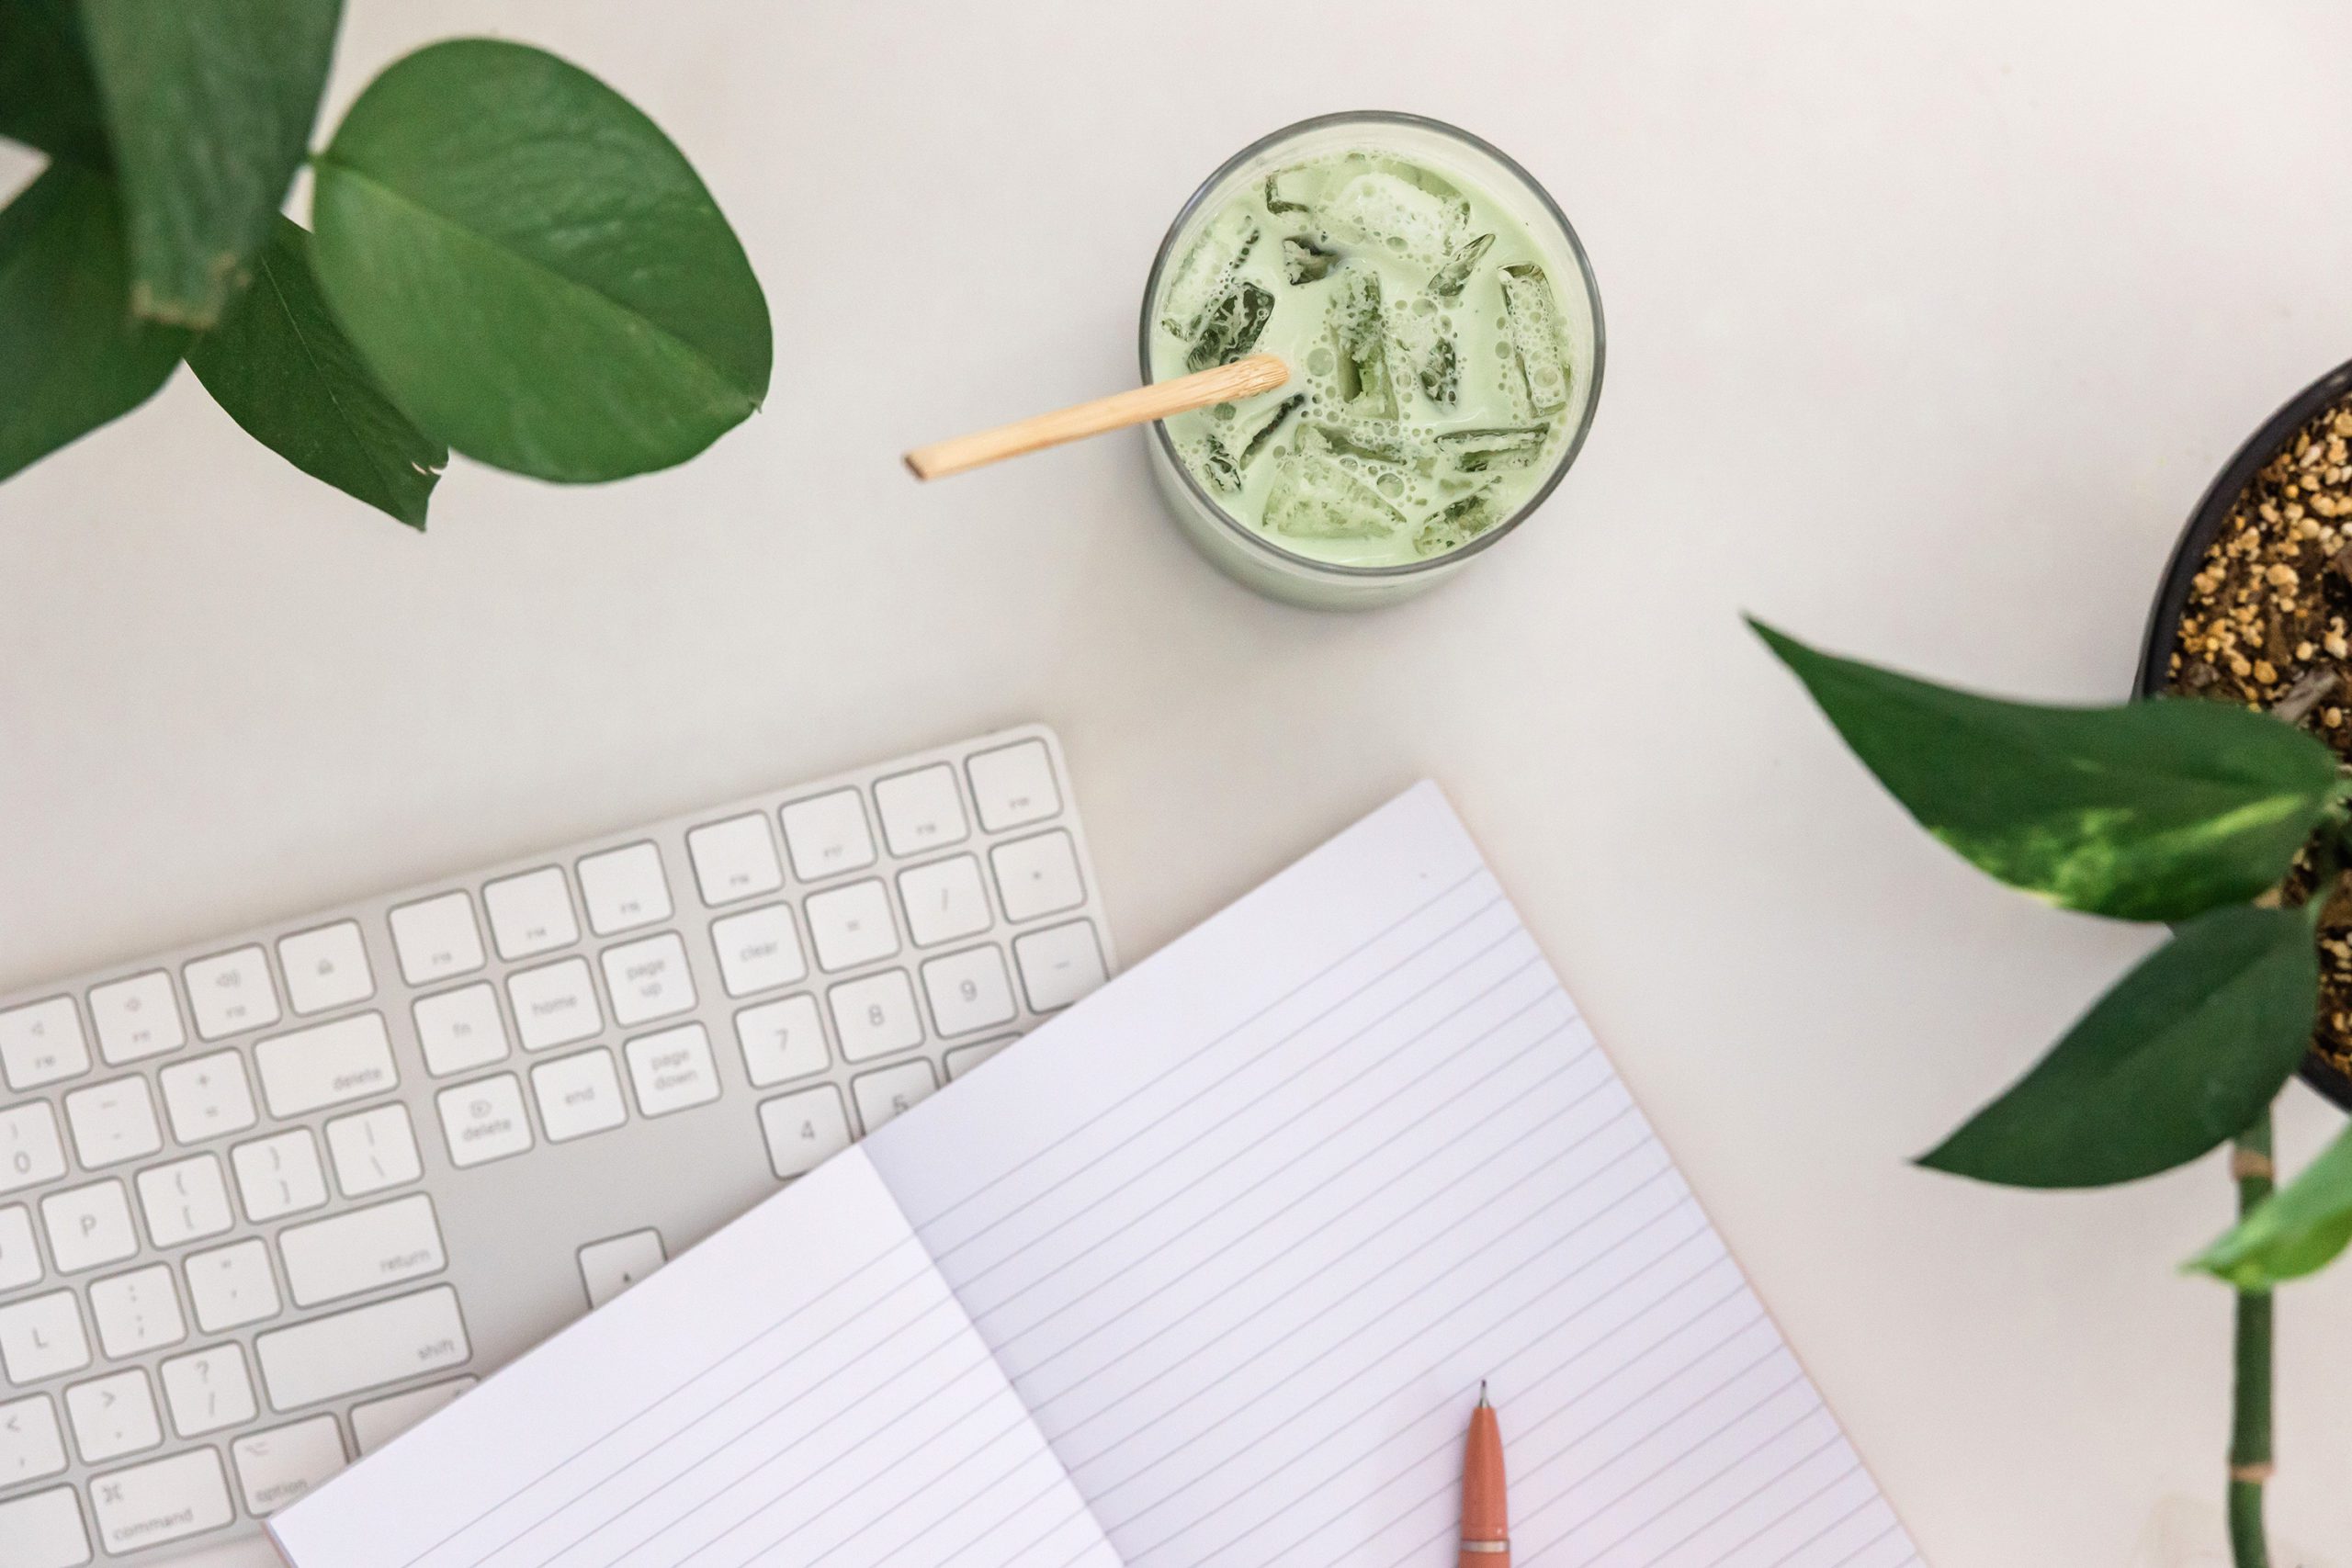 A white workspace with a keyboard, notebook, matcha latte and plants